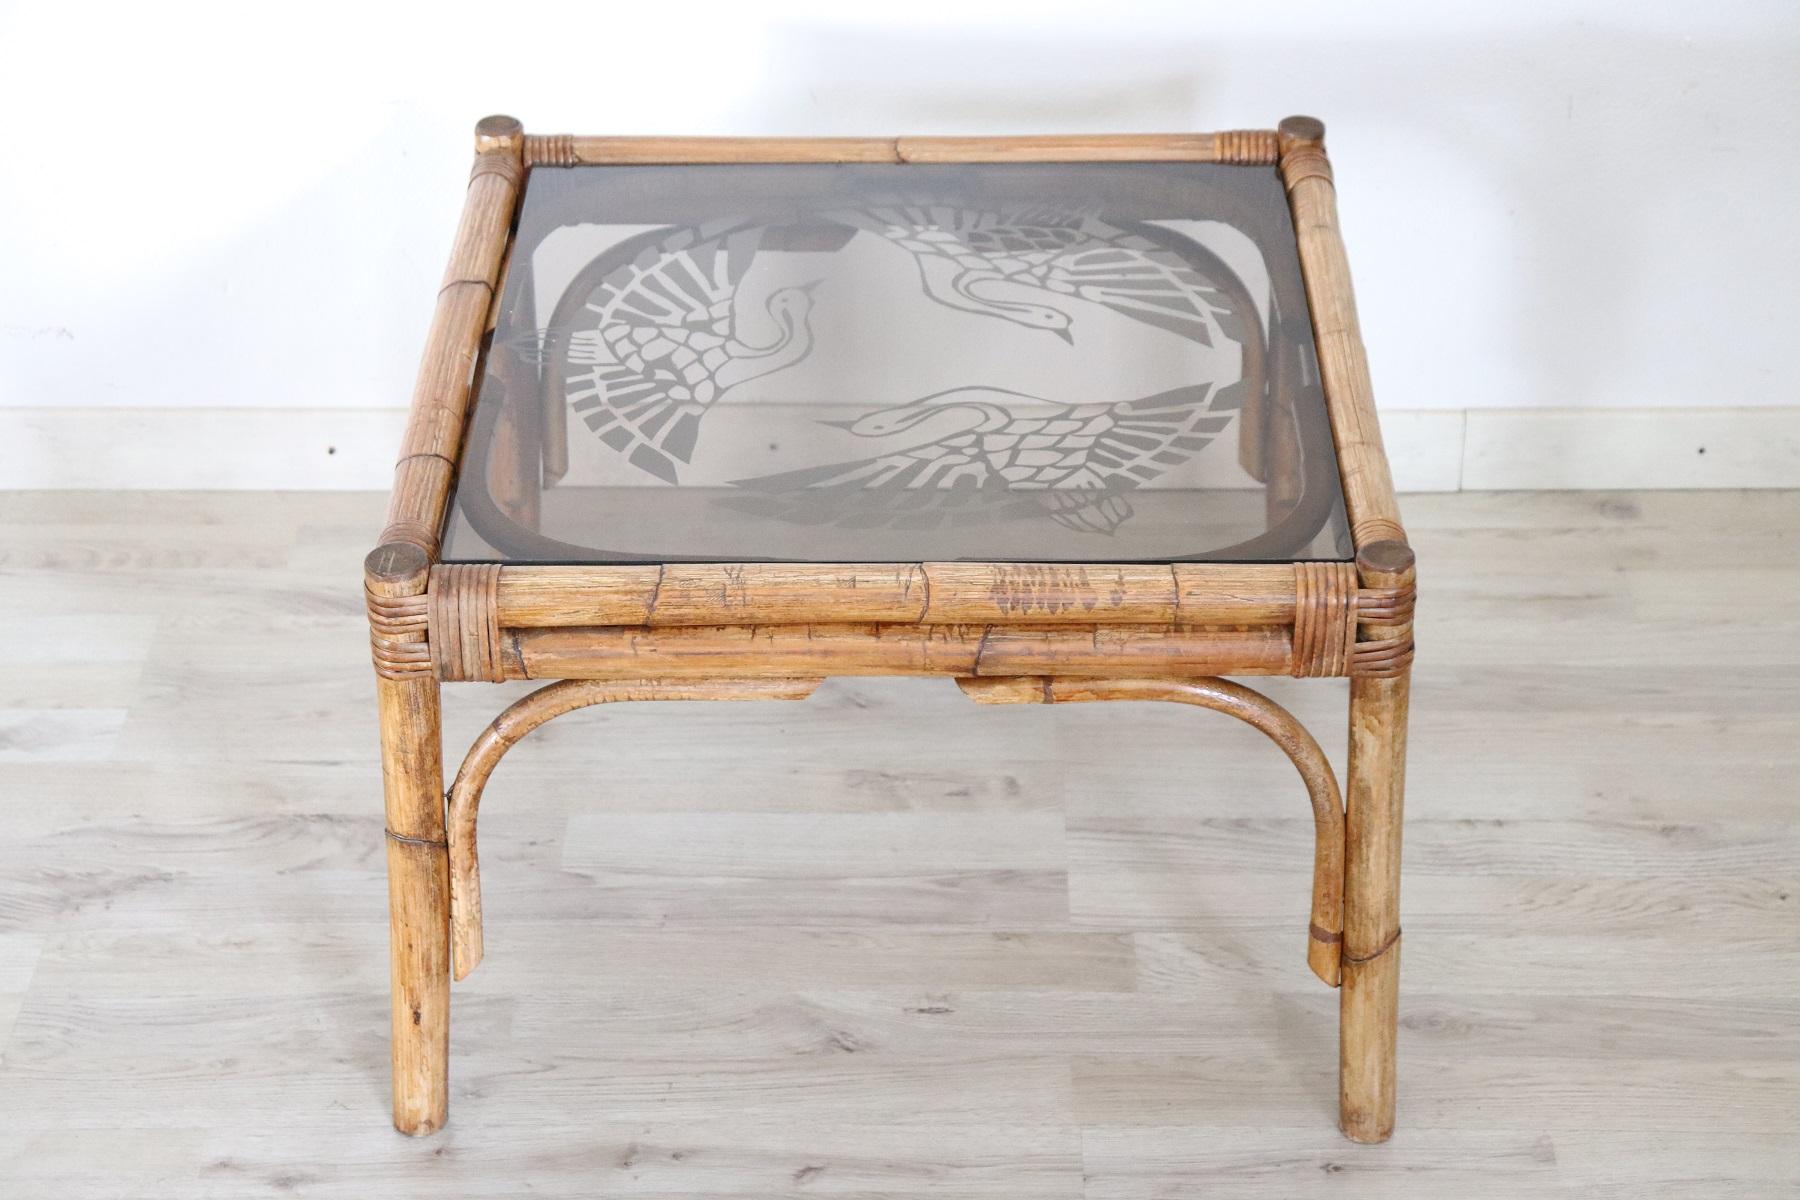 Rare Italian Art Deco sofa table in bamboo. The table was made by Italian artisans around in 1930s. Completely made with bamboo and a finely decorated glass top with refined quality. This furniture is perfect for your patio or your garden in summer.